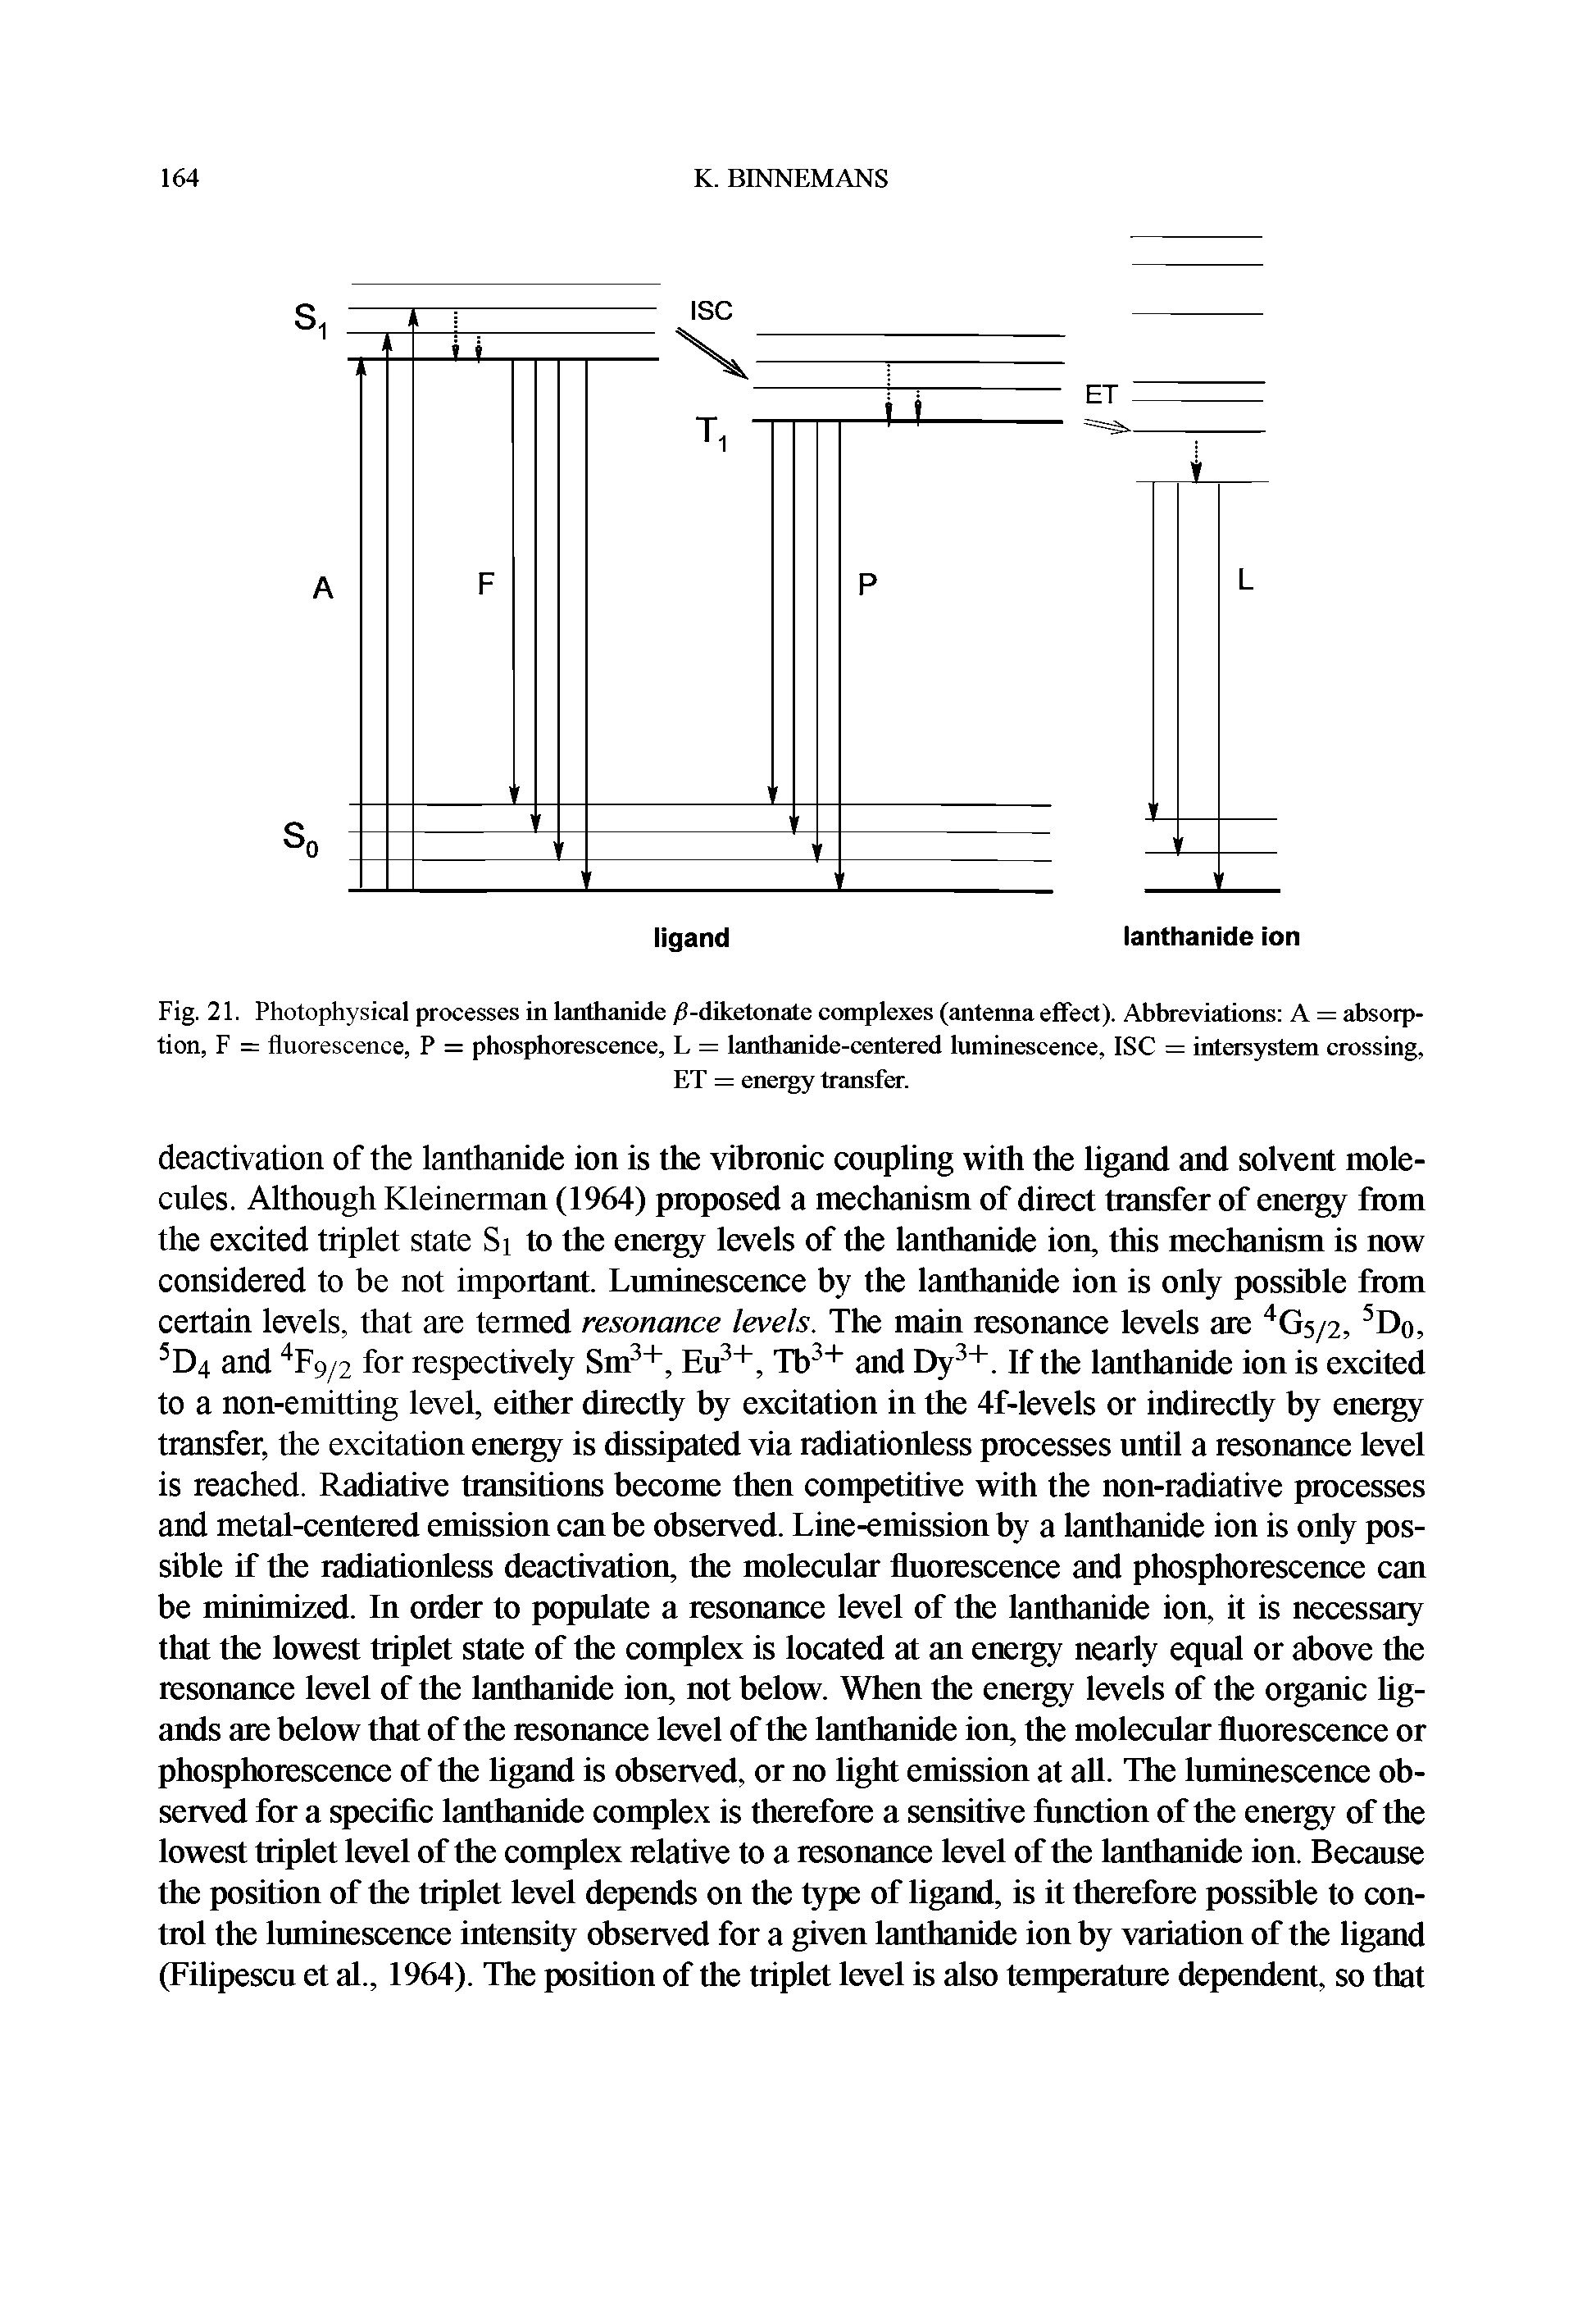 Fig. 21. Photophysical processes in lanthanide -diketonate complexes (antenna effect). Abbreviations A = absorption, F = fluorescence, P = phosphorescence, L = lanthanide-centered luminescence, ISC = intersystem crossing,...